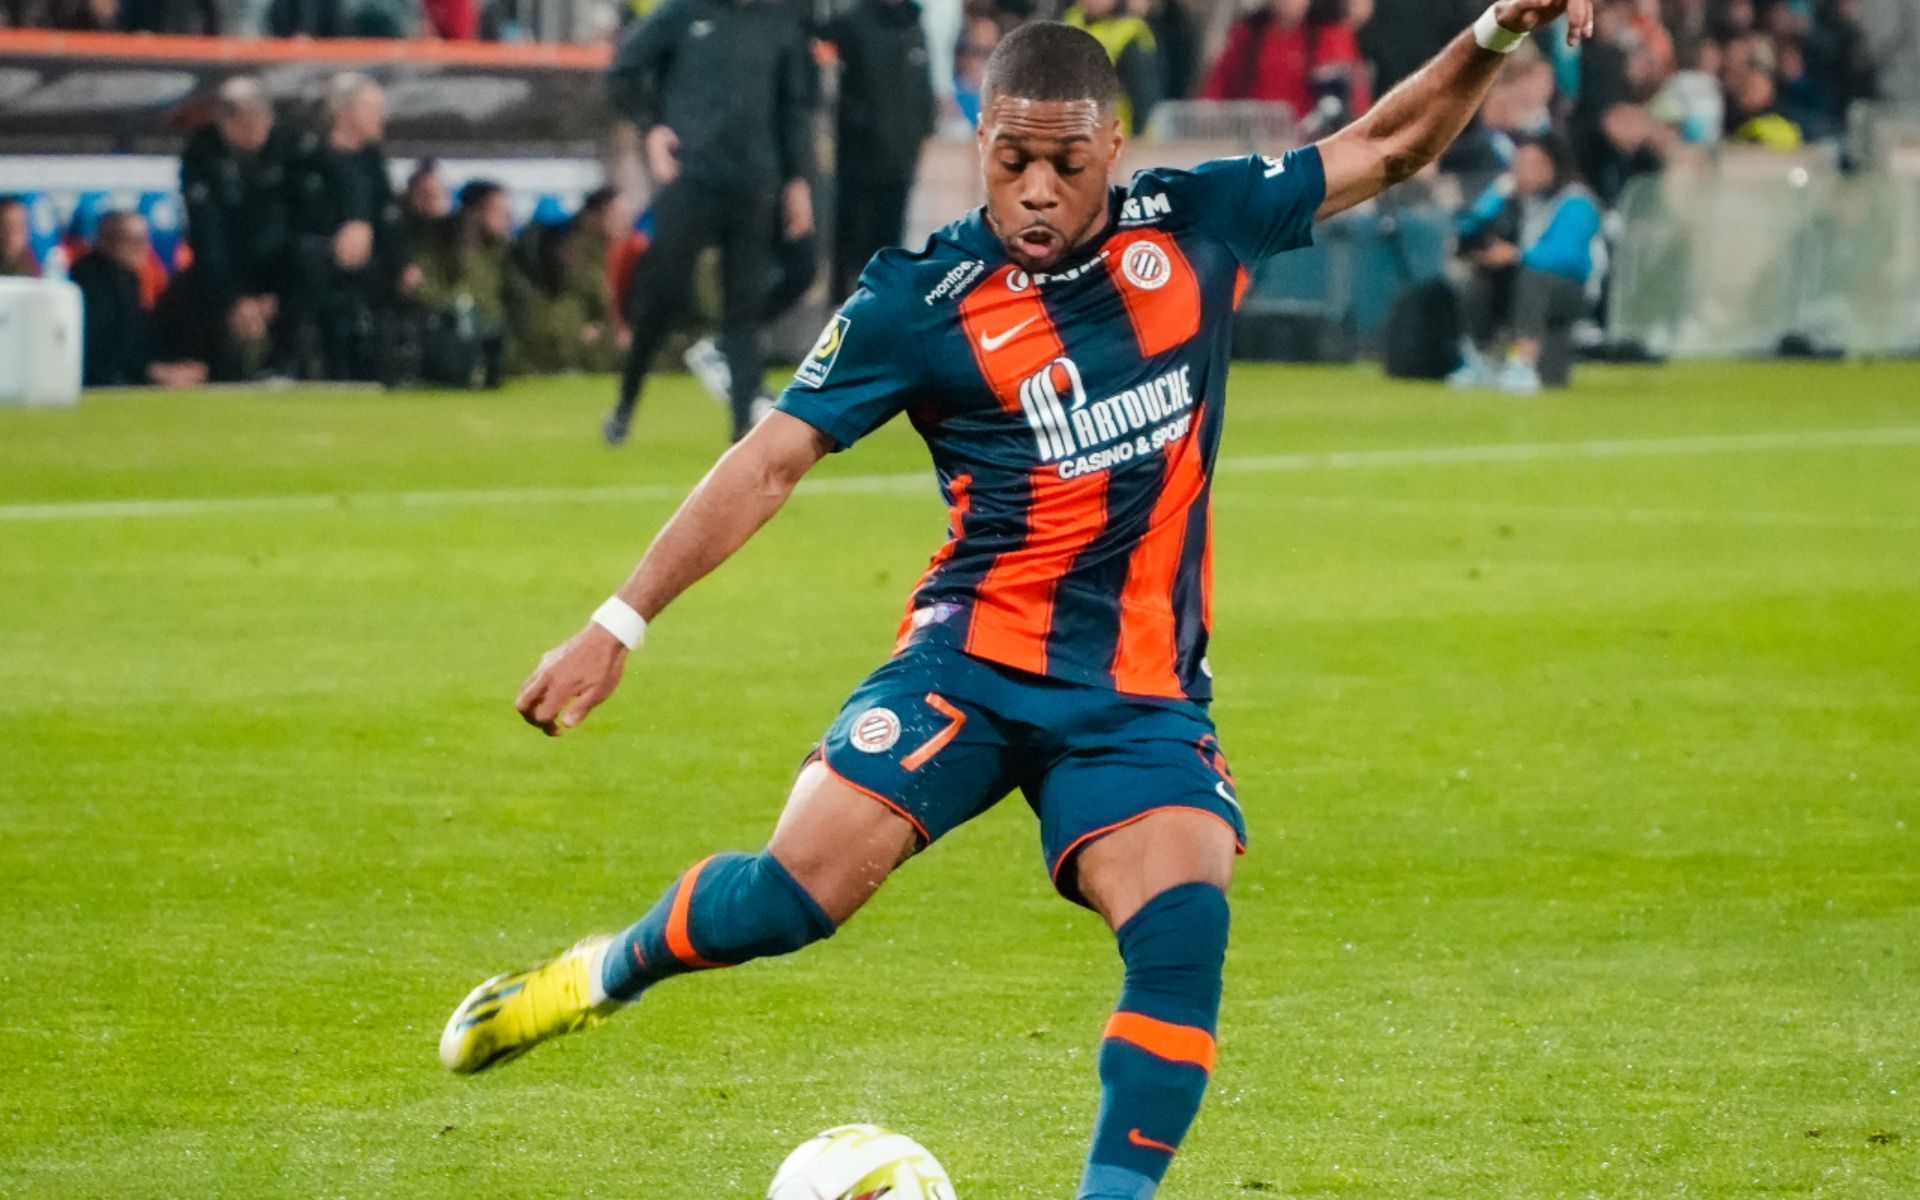 Can Montpellier defeat Le Havre this weekend?